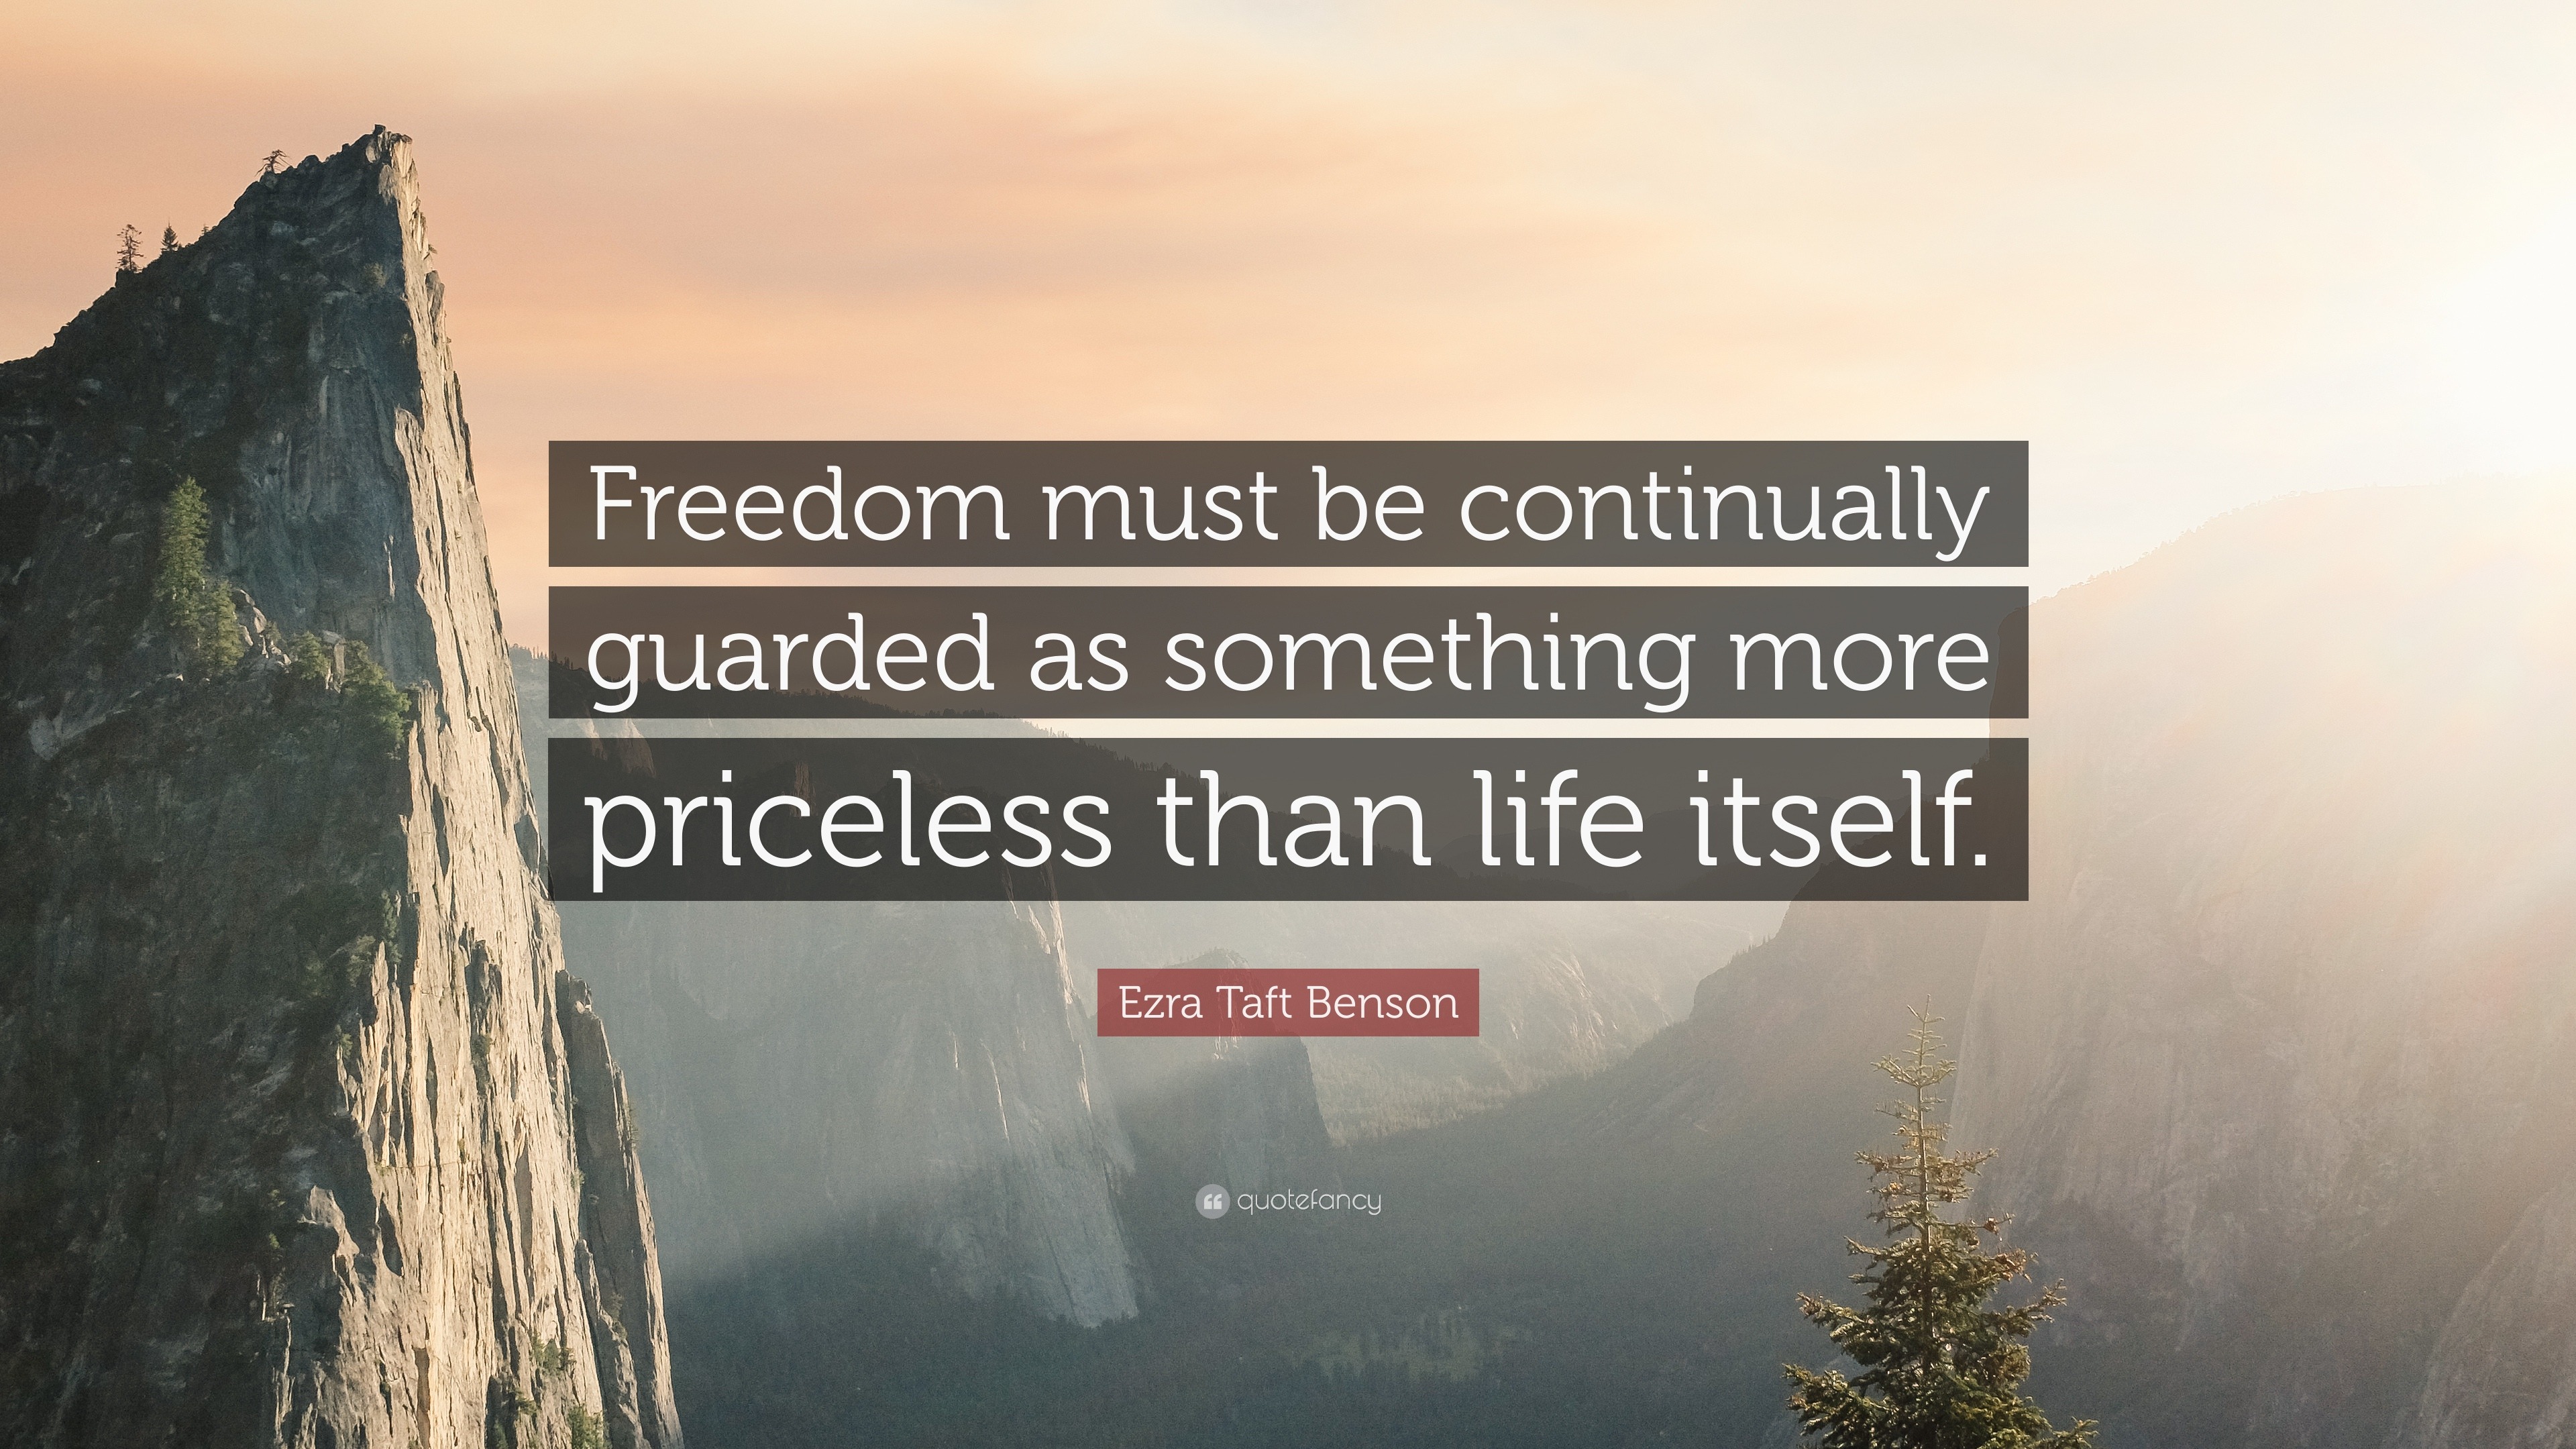 Ezra Taft Benson Quote: “Freedom must be continually guarded as ...